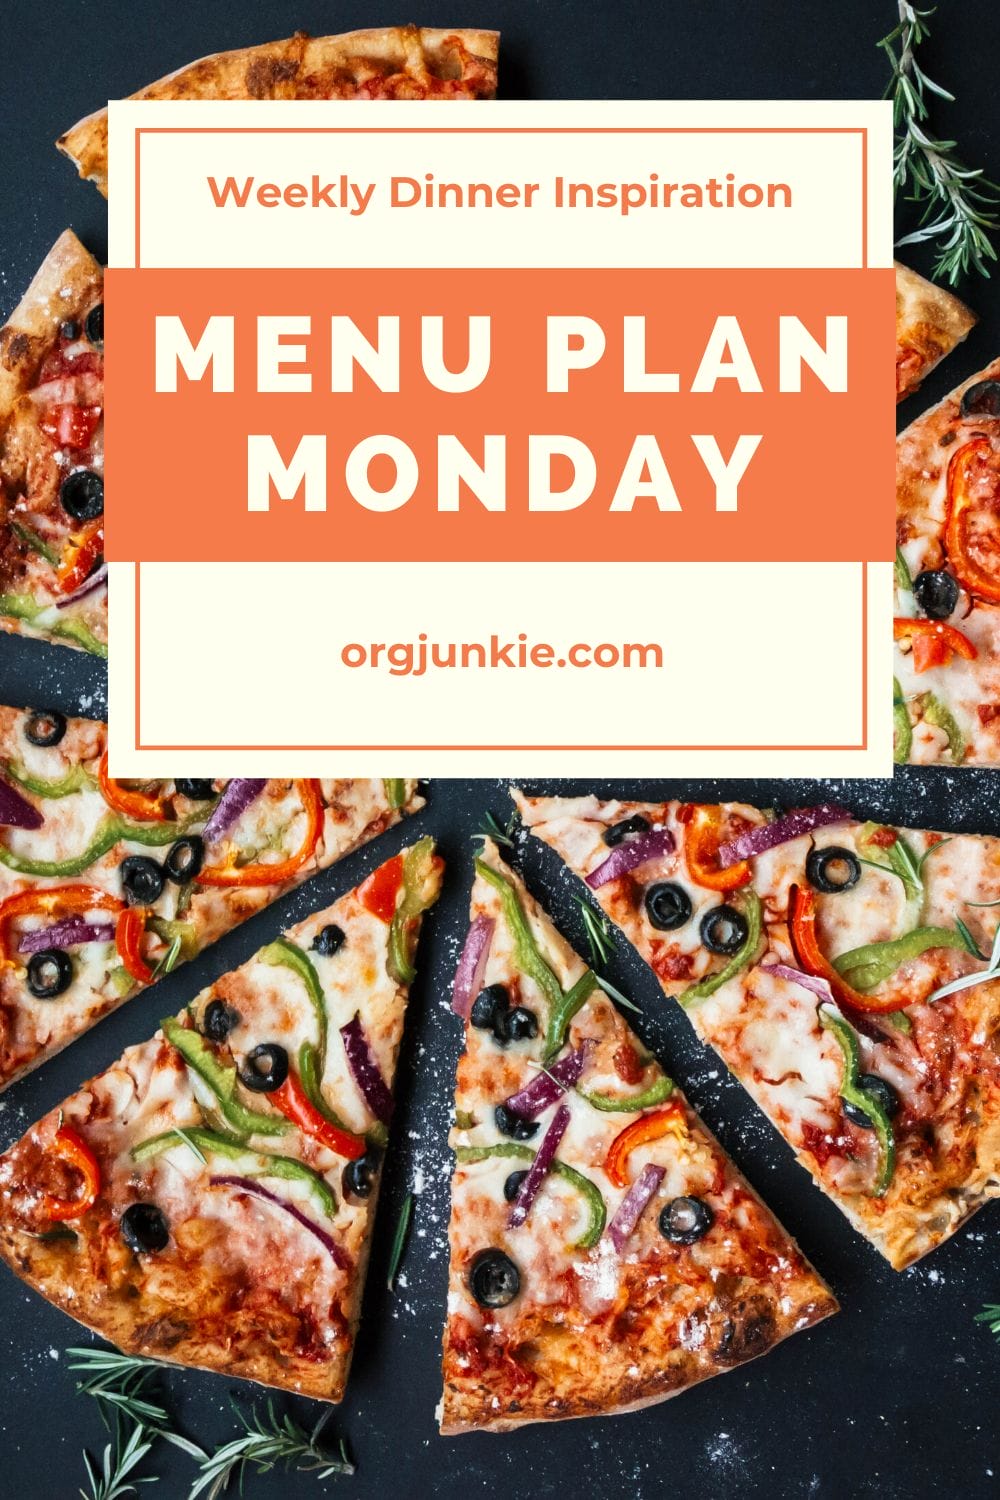 Menu Plan Monday for the week of March 2/20 ~ weekly dinner inspiration to help you get dinner on the table each night with less stress and chaos